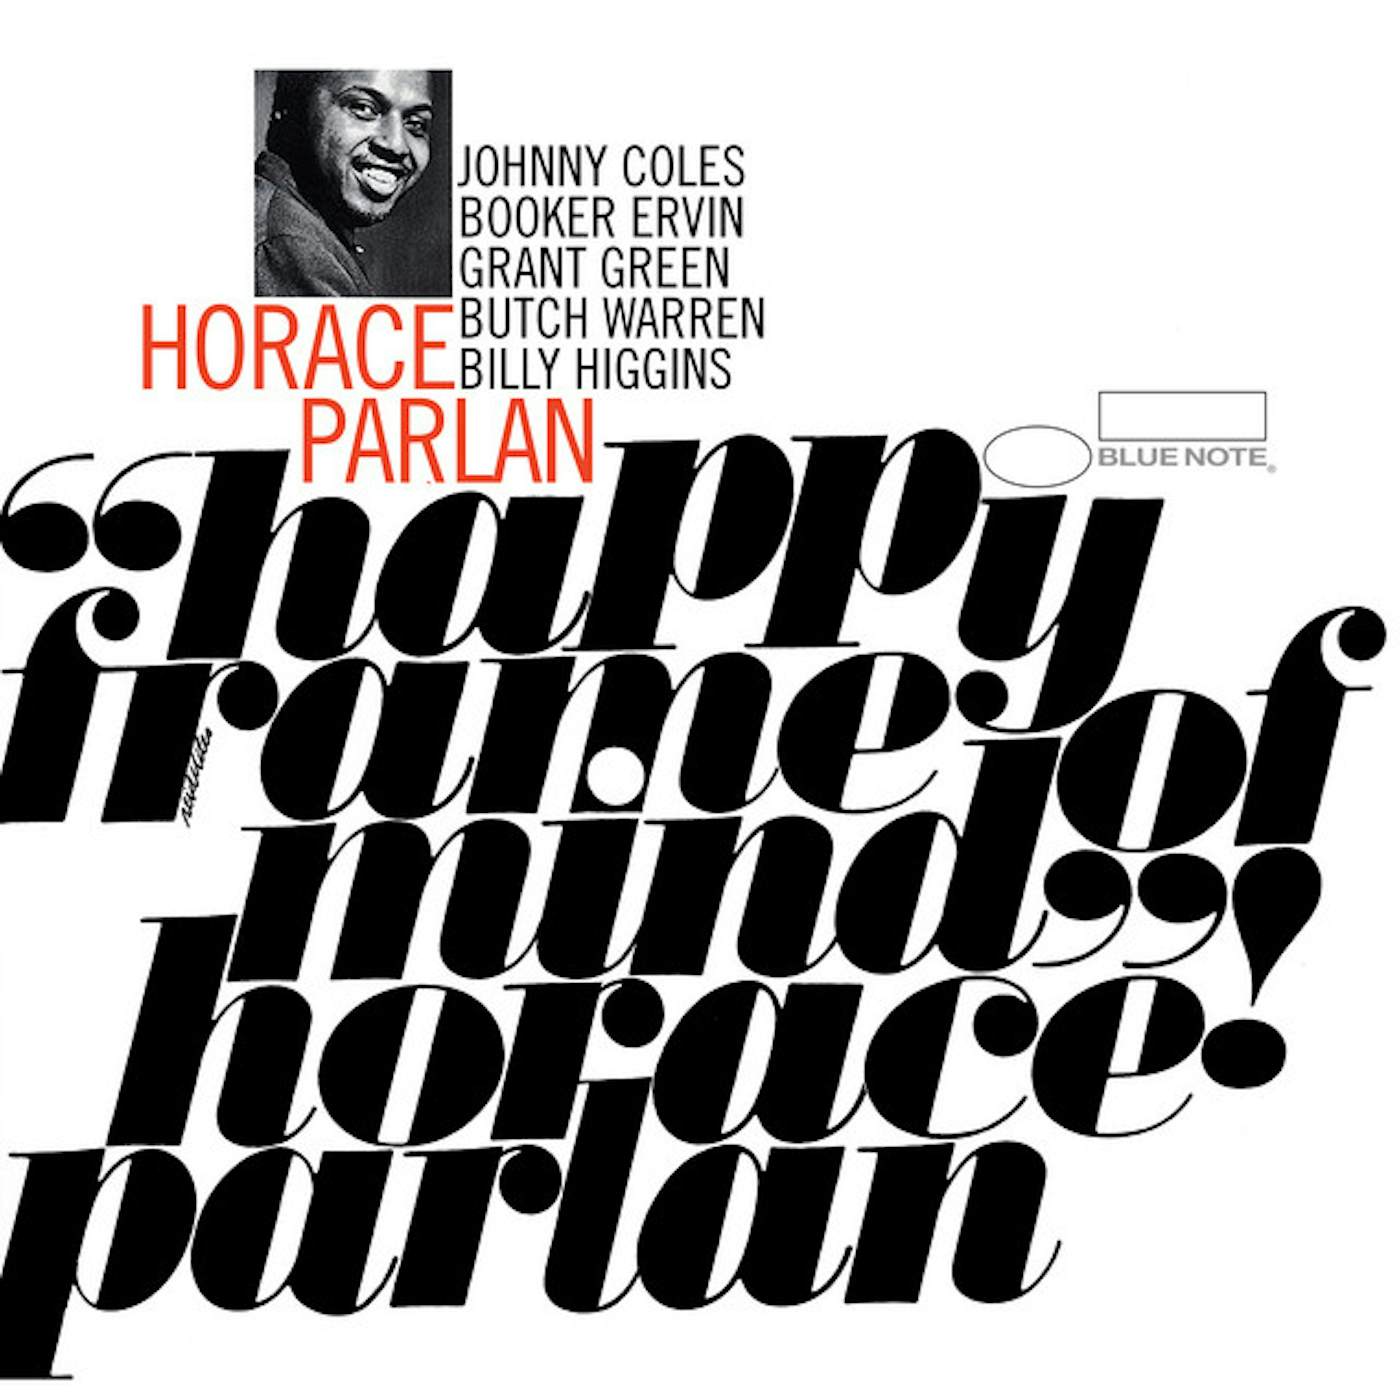 Horace Parlan HAPPY FRAME OF MIND CD